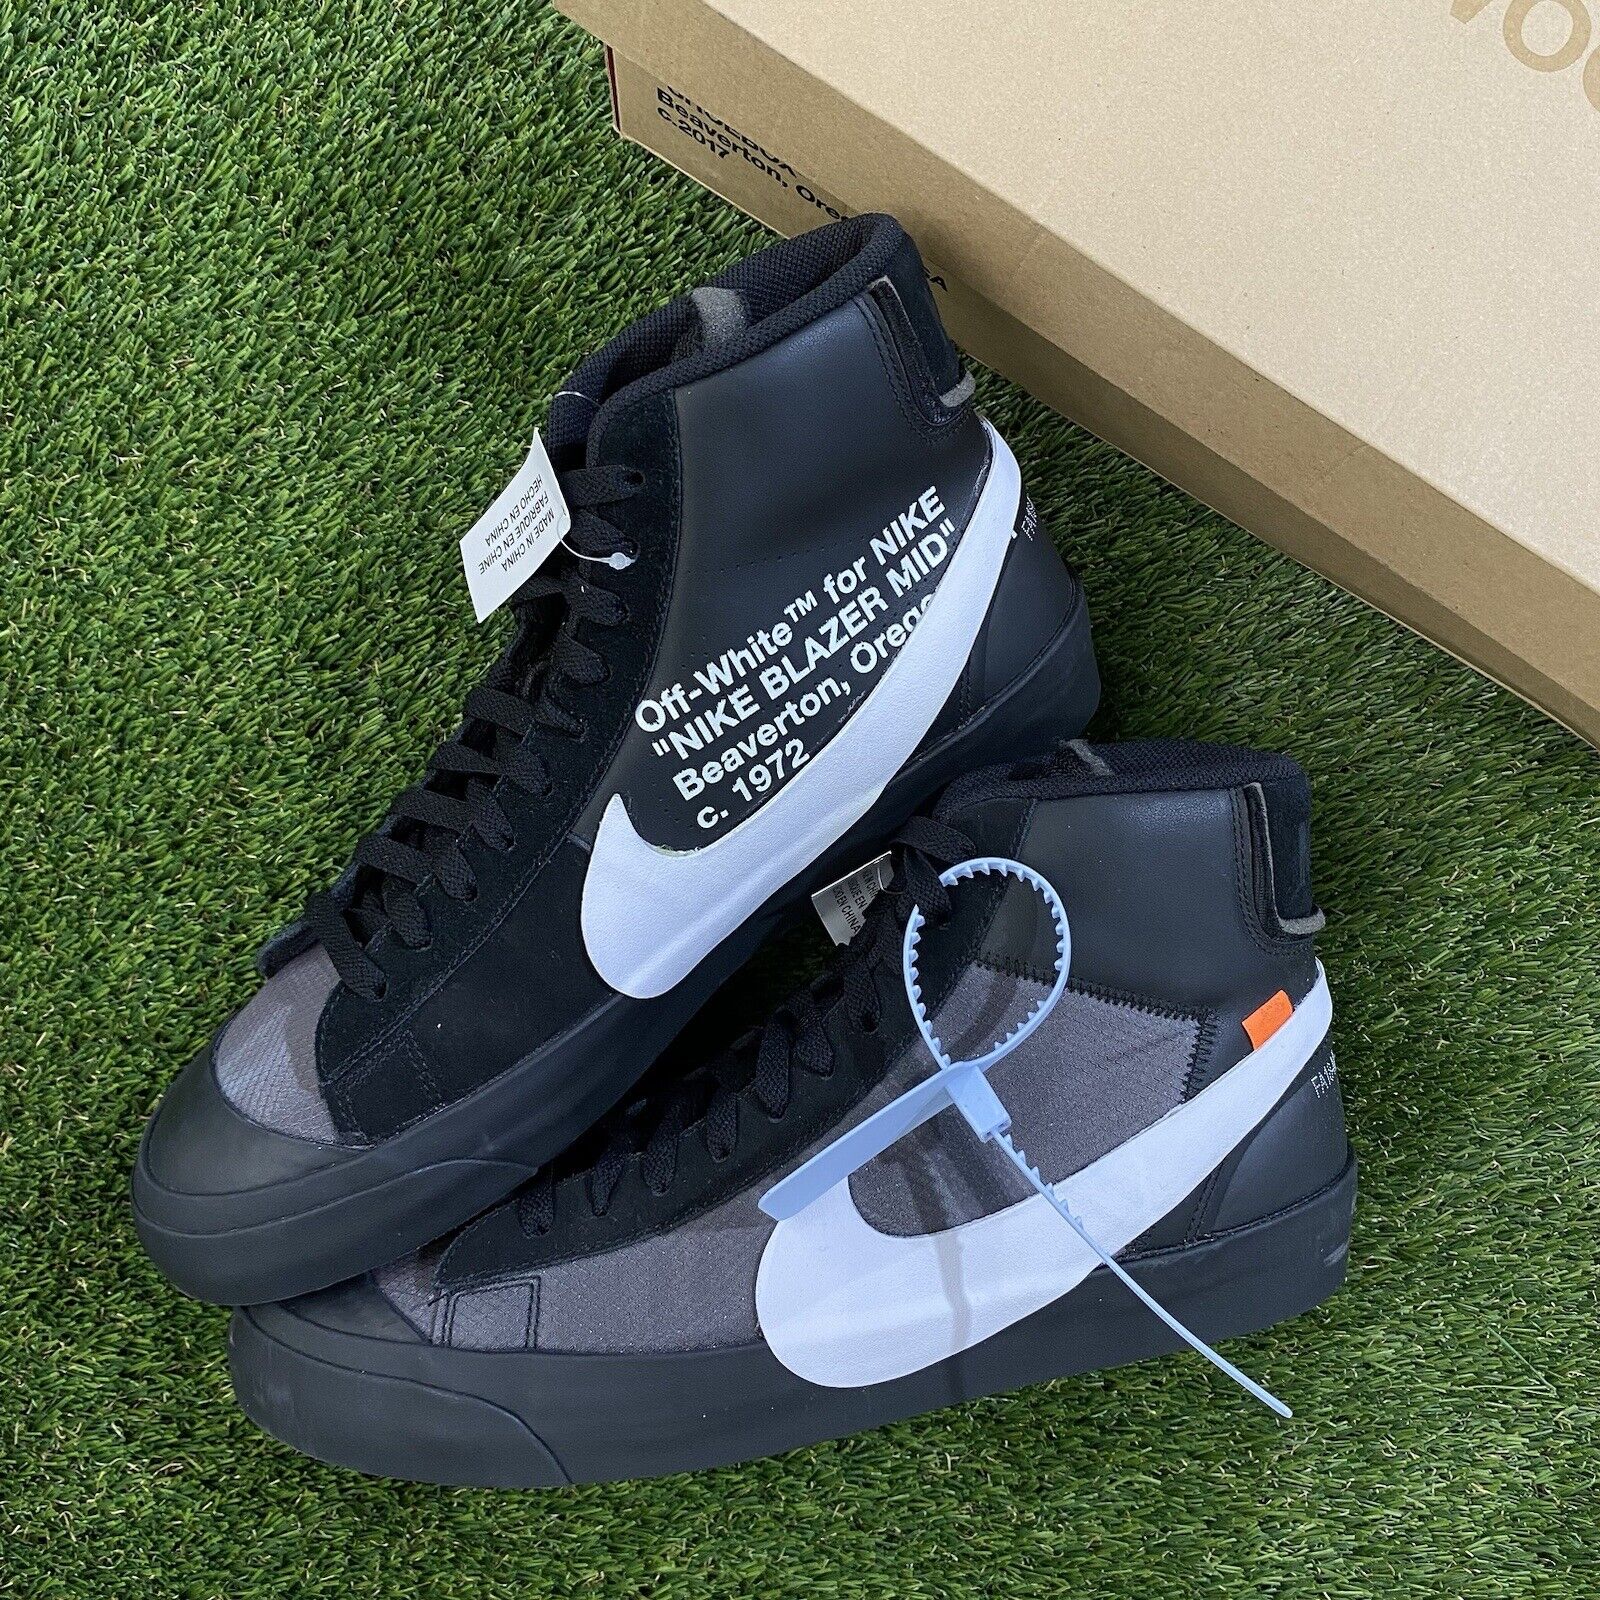 Founder Summon call out Size 11 - Nike Blazer Mid x OFF-WHITE 'Grim Reapers' 2018 for sale online |  eBay